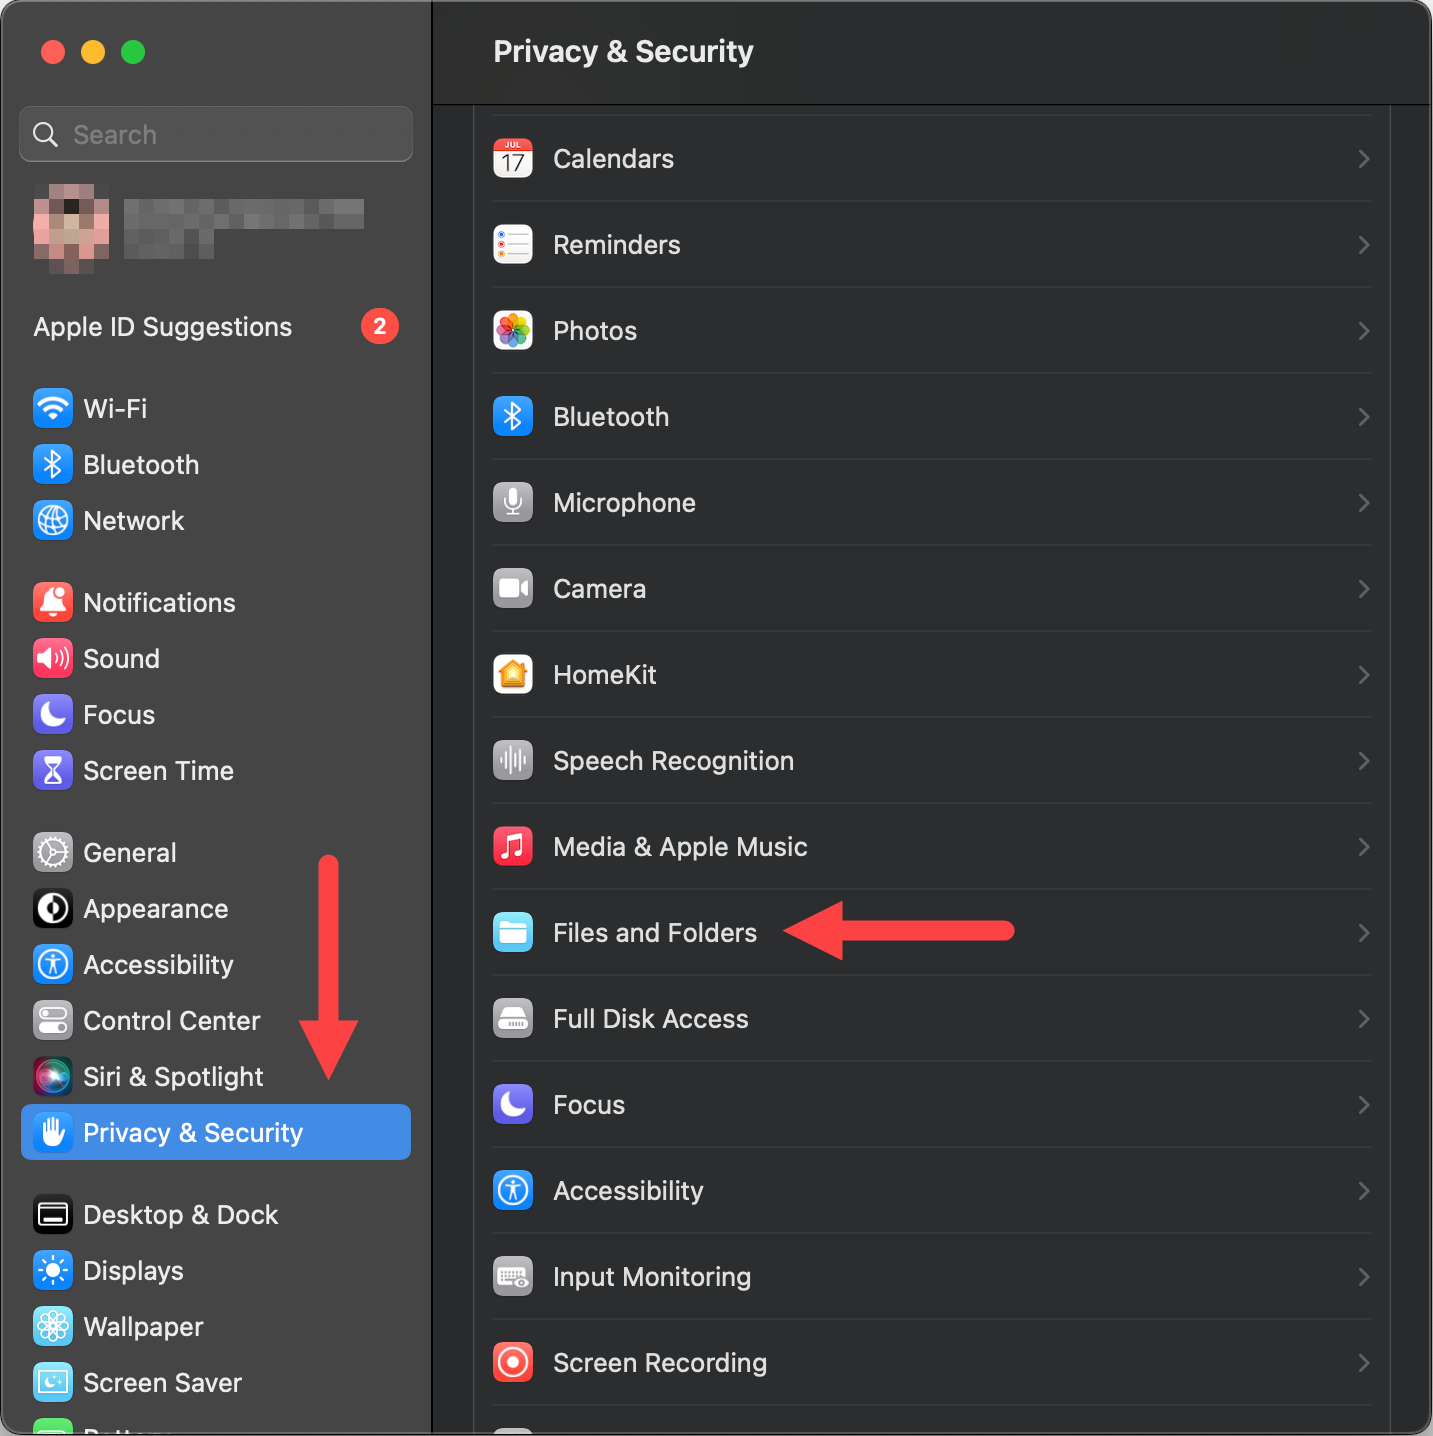 Files and Folders in Privacy & Security identified in System Preferences as described